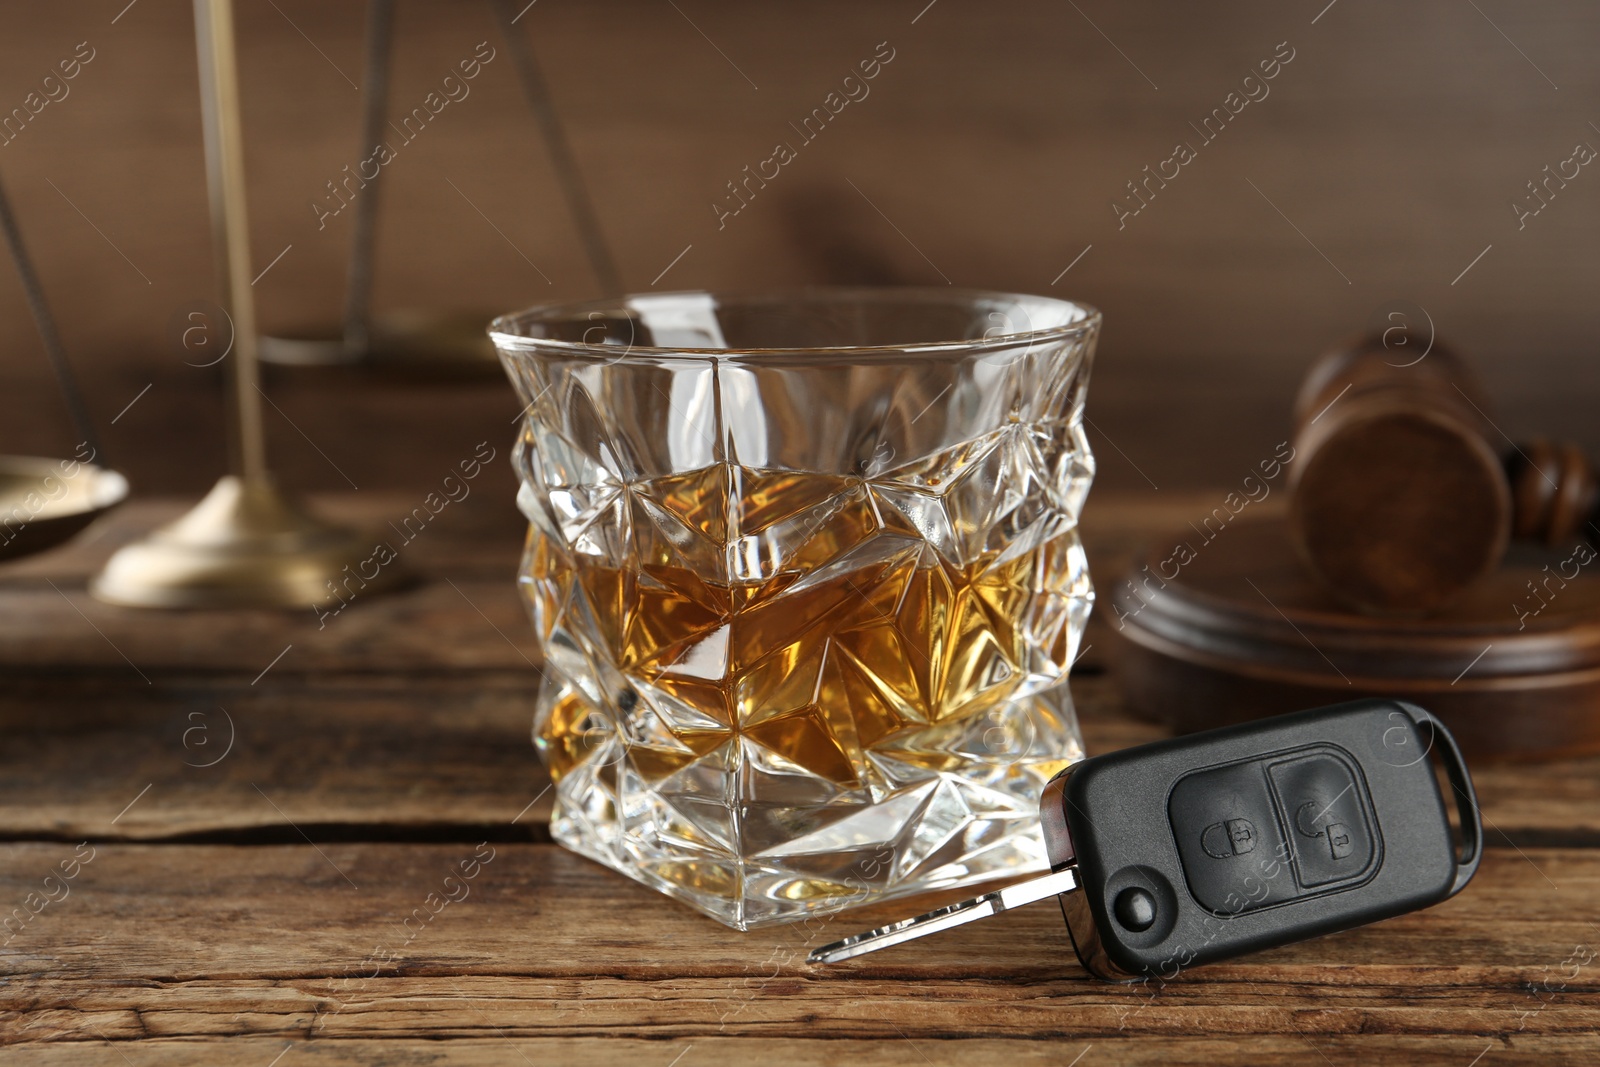 Photo of Car key, glass of alcohol near gavel on wooden table. Dangerous drinking and driving